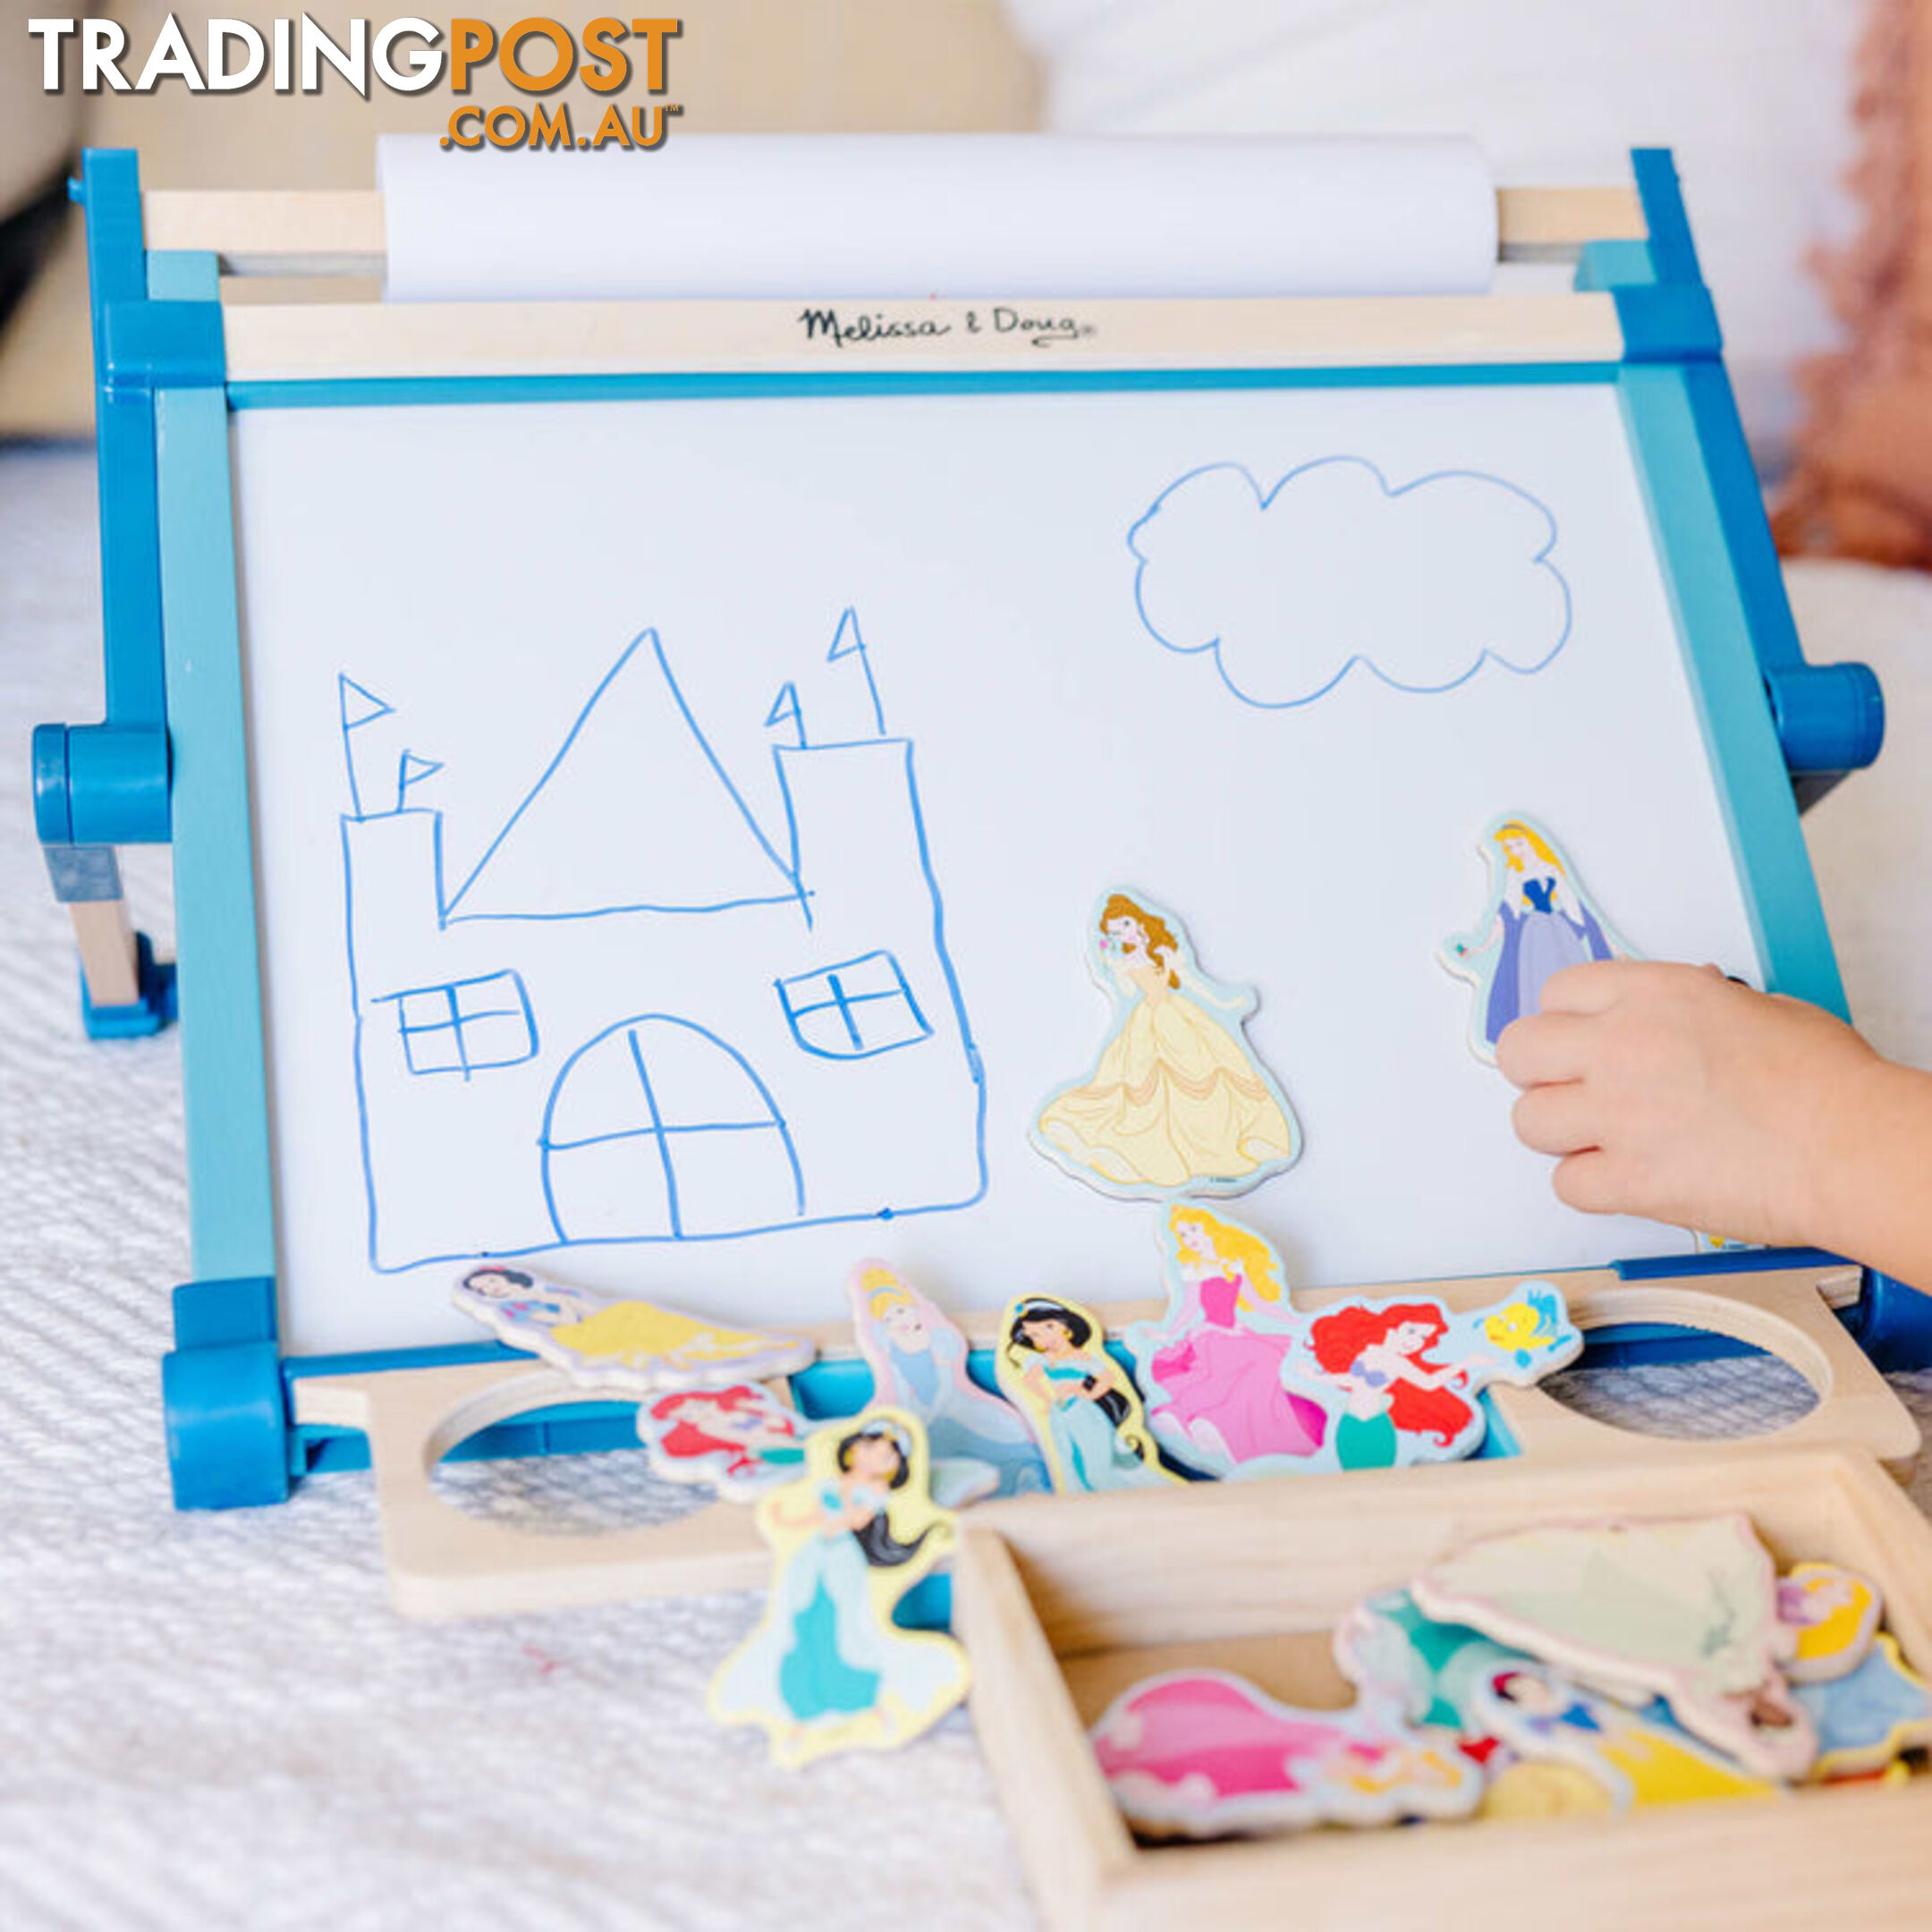 Melissa & Doug - Deluxe Double-sided Tabletop Easel - Mdmnd2790 - 000772027908